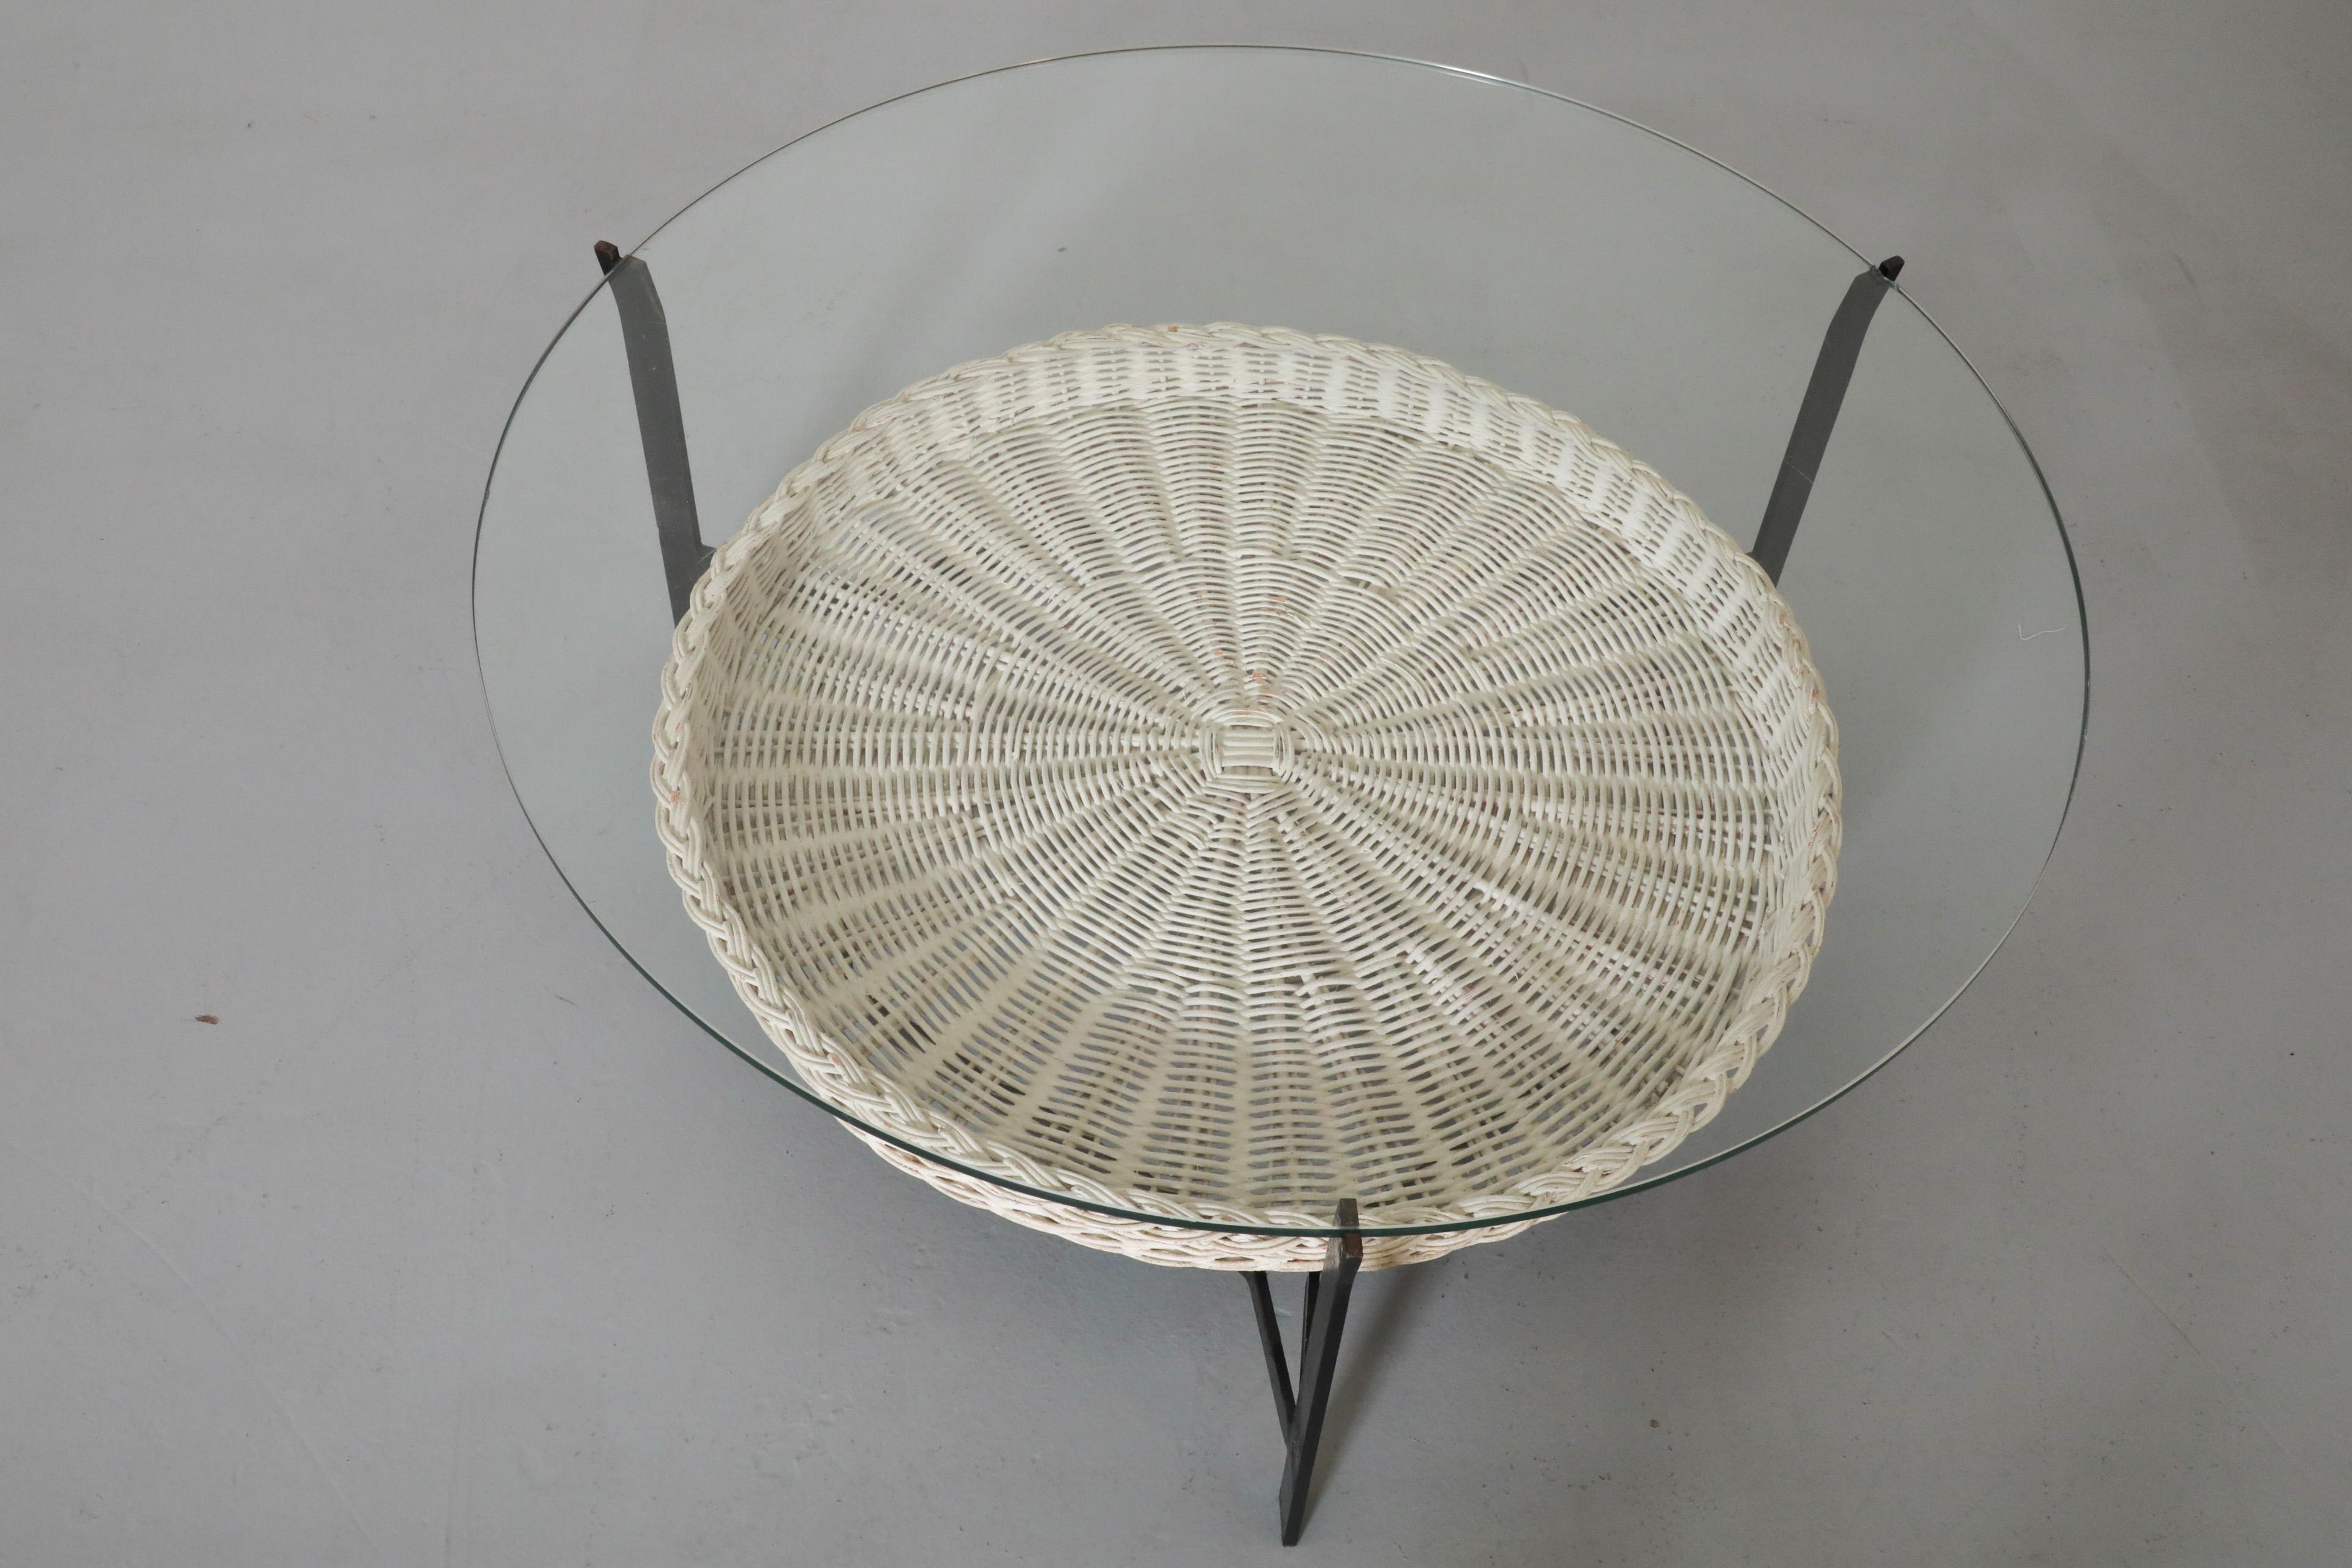 Gebr. Jonkers Modernist Glass Coffee Table with White Basket In Good Condition For Sale In Los Angeles, CA